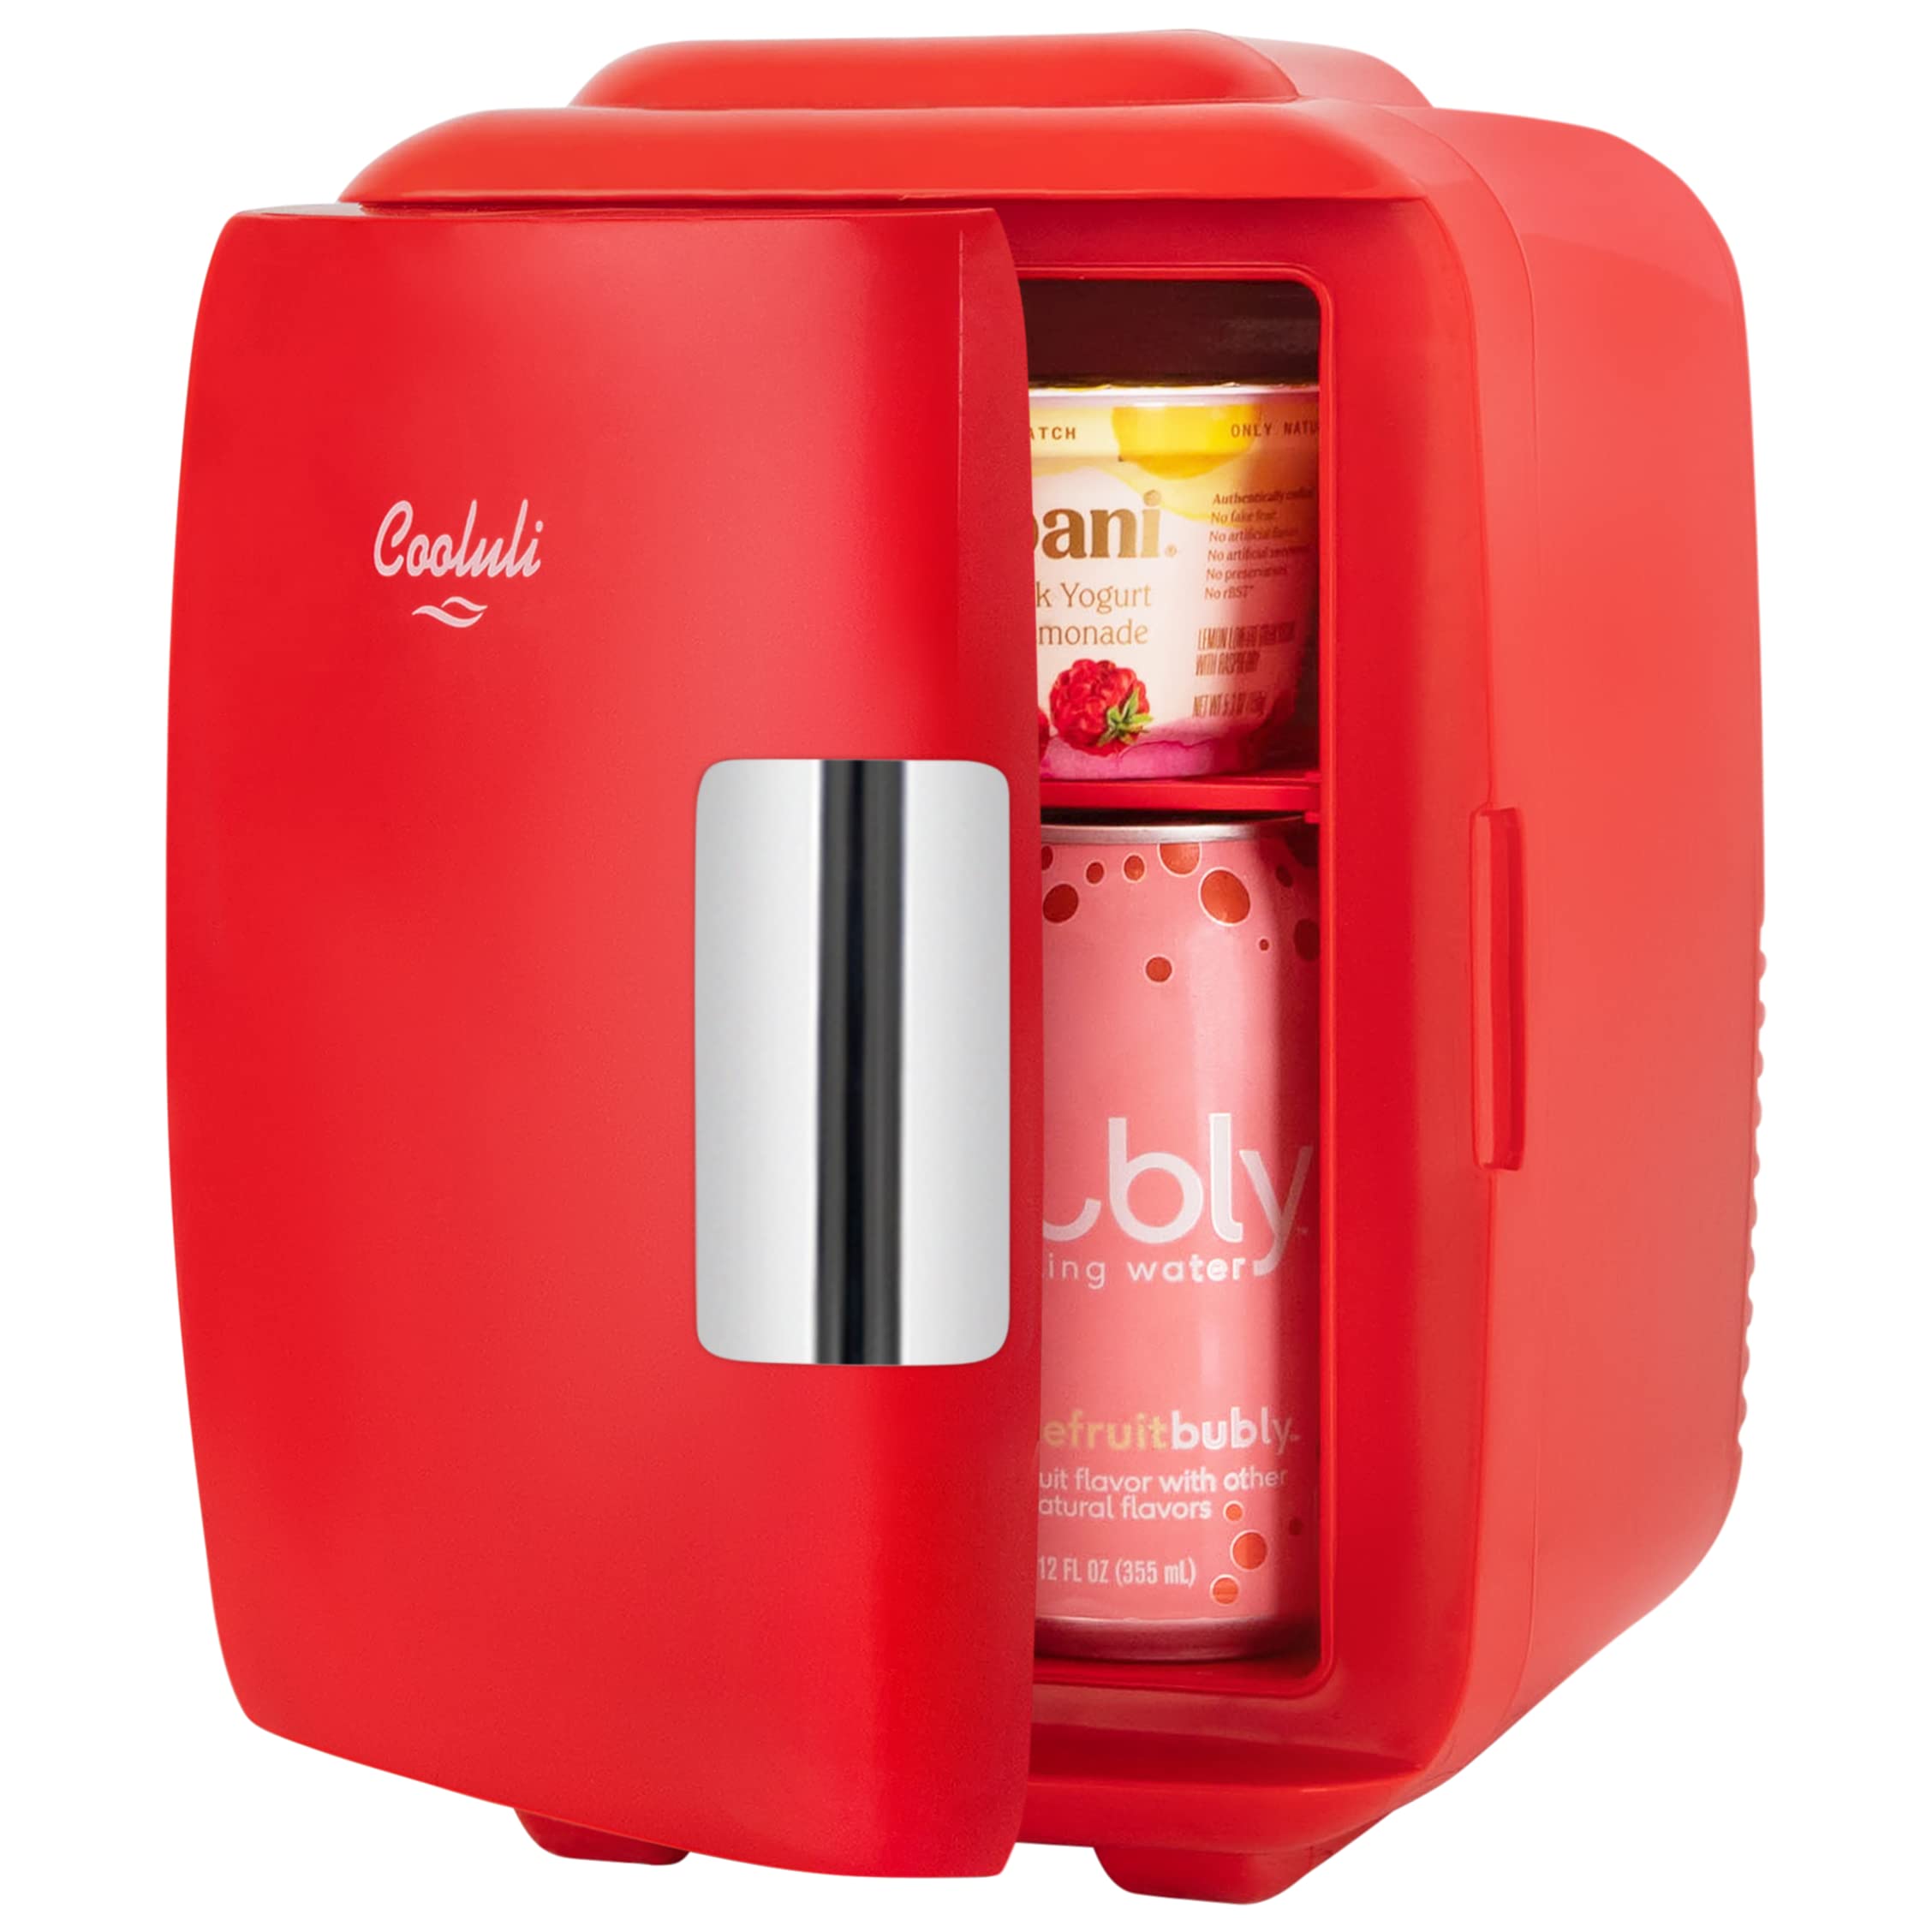 Cooluli Classic Red 4 Liter Compact Cooler Warmer Mini Fridge with AC/DC/USB Power - Great for Bedroom, Office, Car, Dorm - Portable Makeup Skincare Fridge